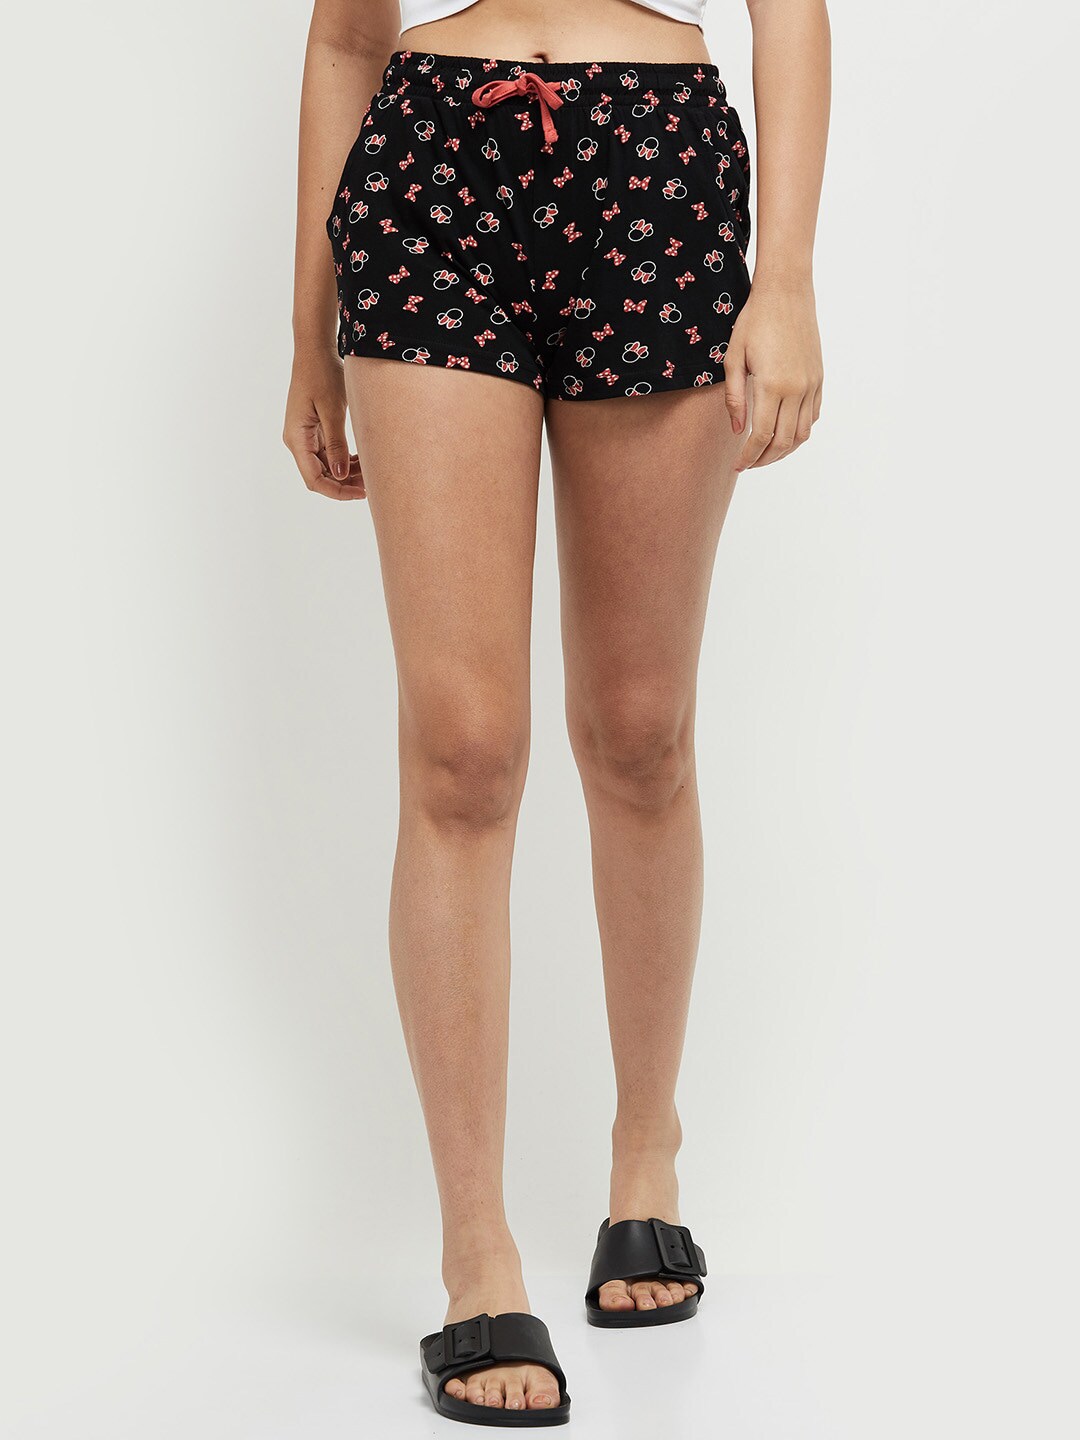 max Women Black & Red Printed Lounge Shorts Price in India